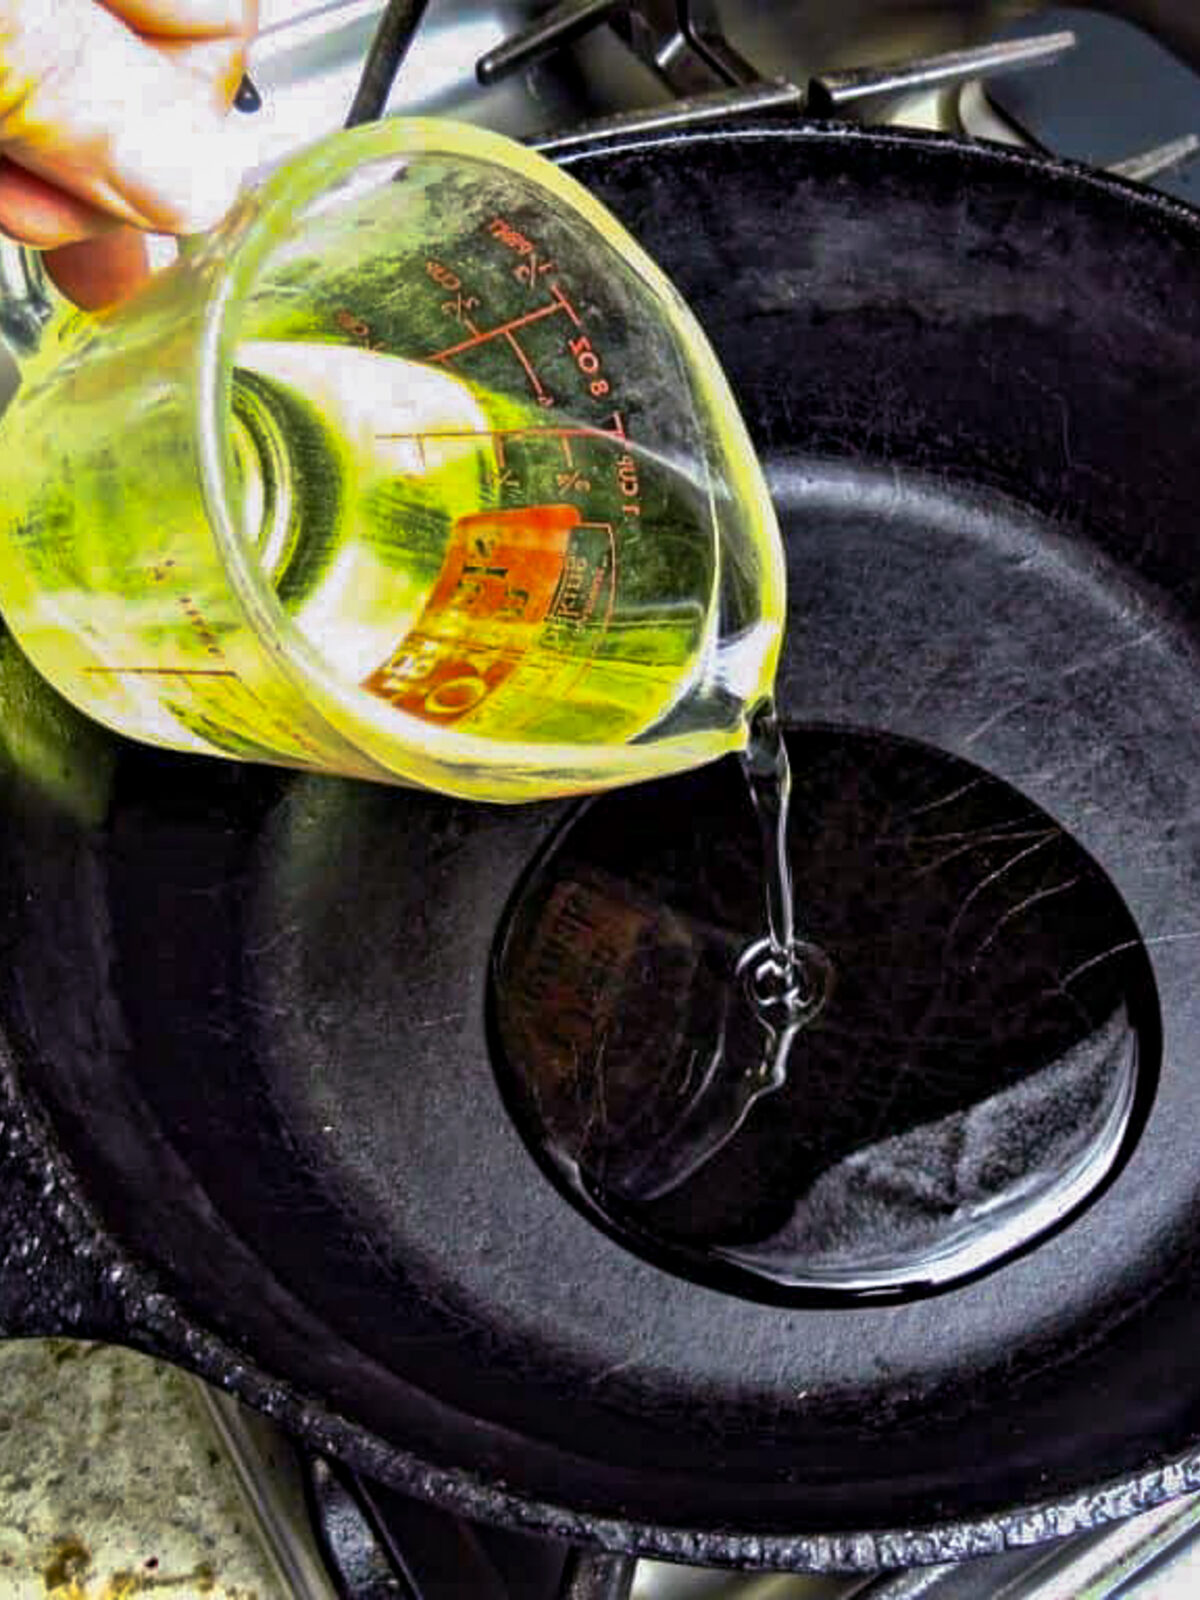 A cup of oil being poured into a black pot.